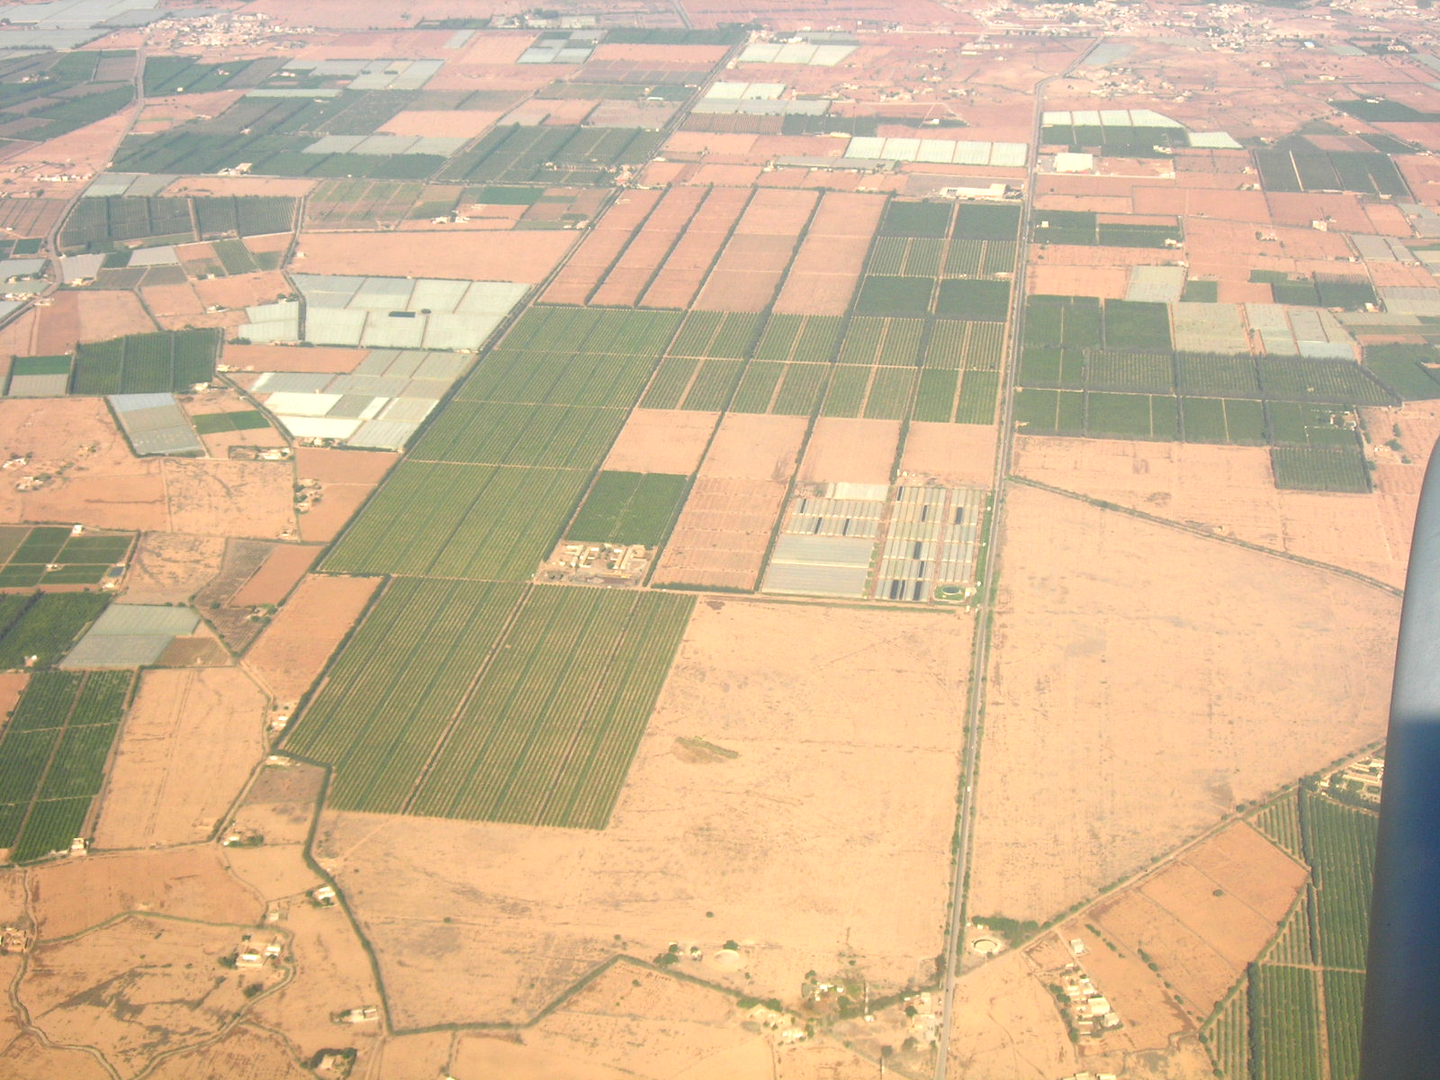 DIE - Annabelle Houdret, YEAR - Irrigated agriculture in the Souss region, Morocco.png